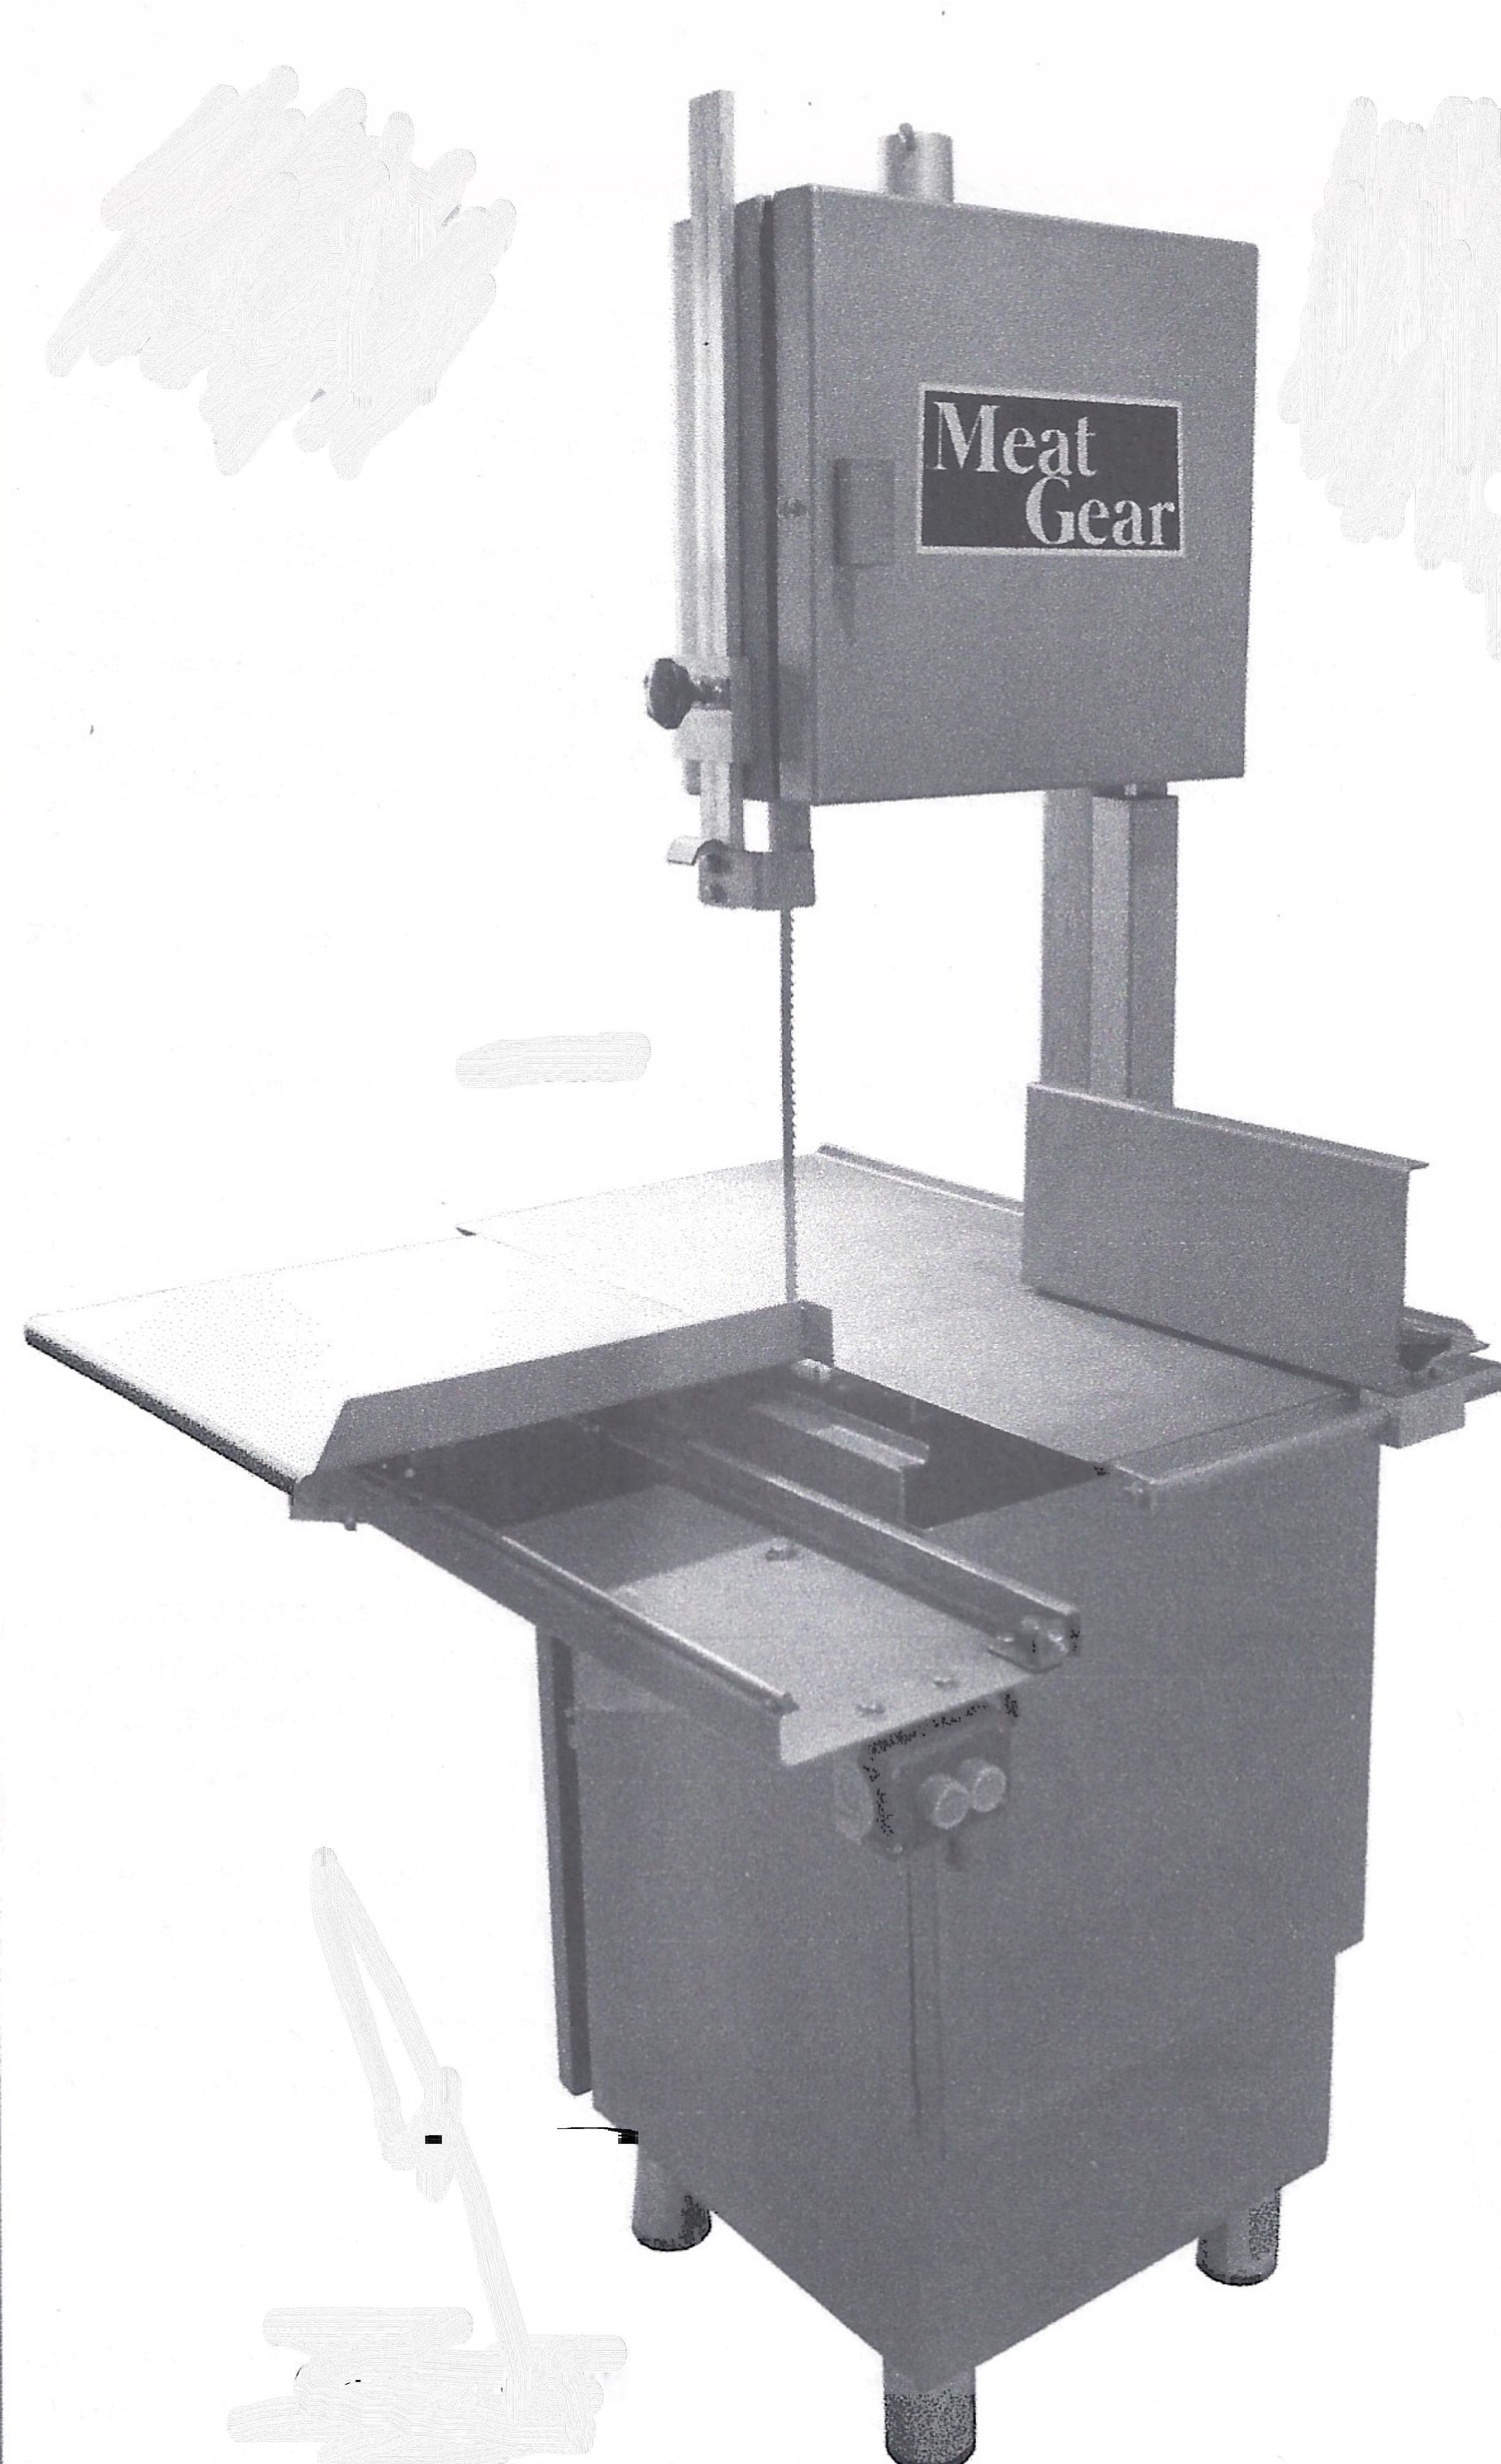 Meat Band Saw by Meat Gear